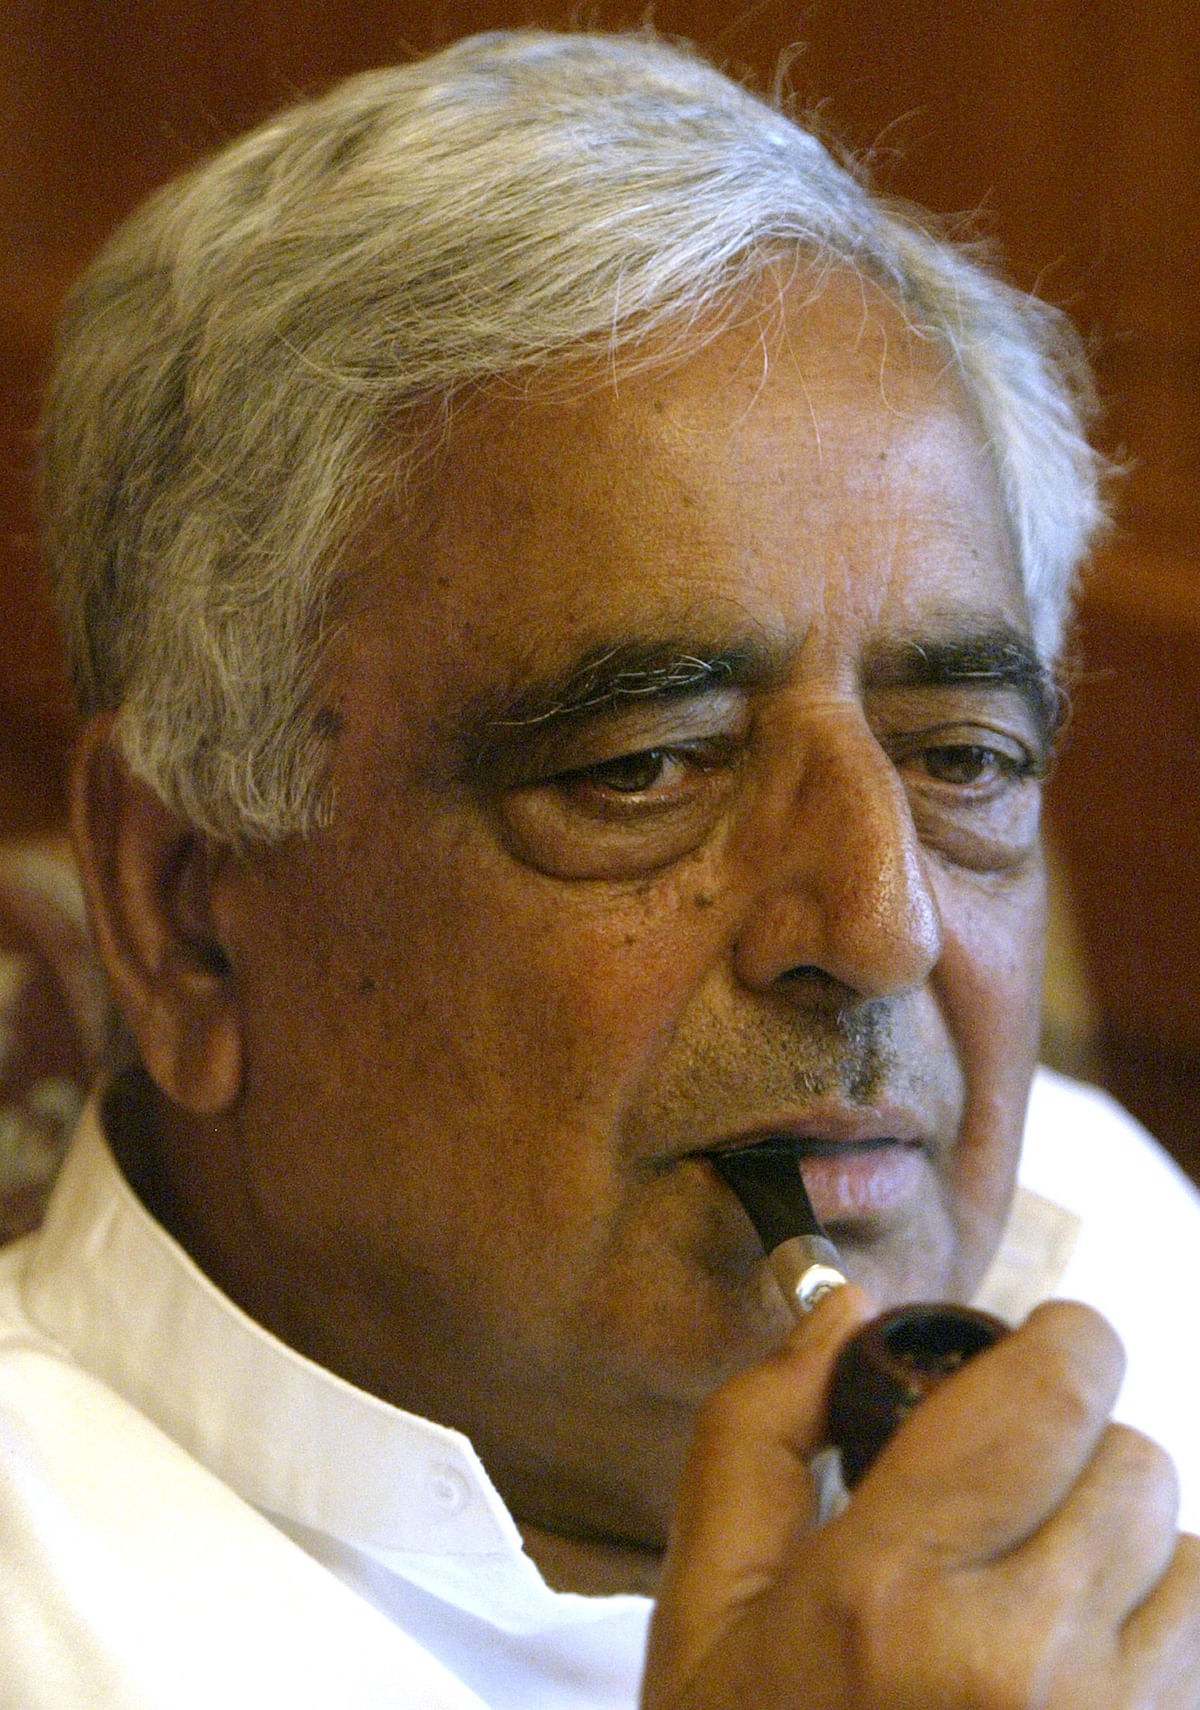 Remembering India’s first Muslim home minister, Mufti Mohammad Sayeed, on his 81st birth anniversary.